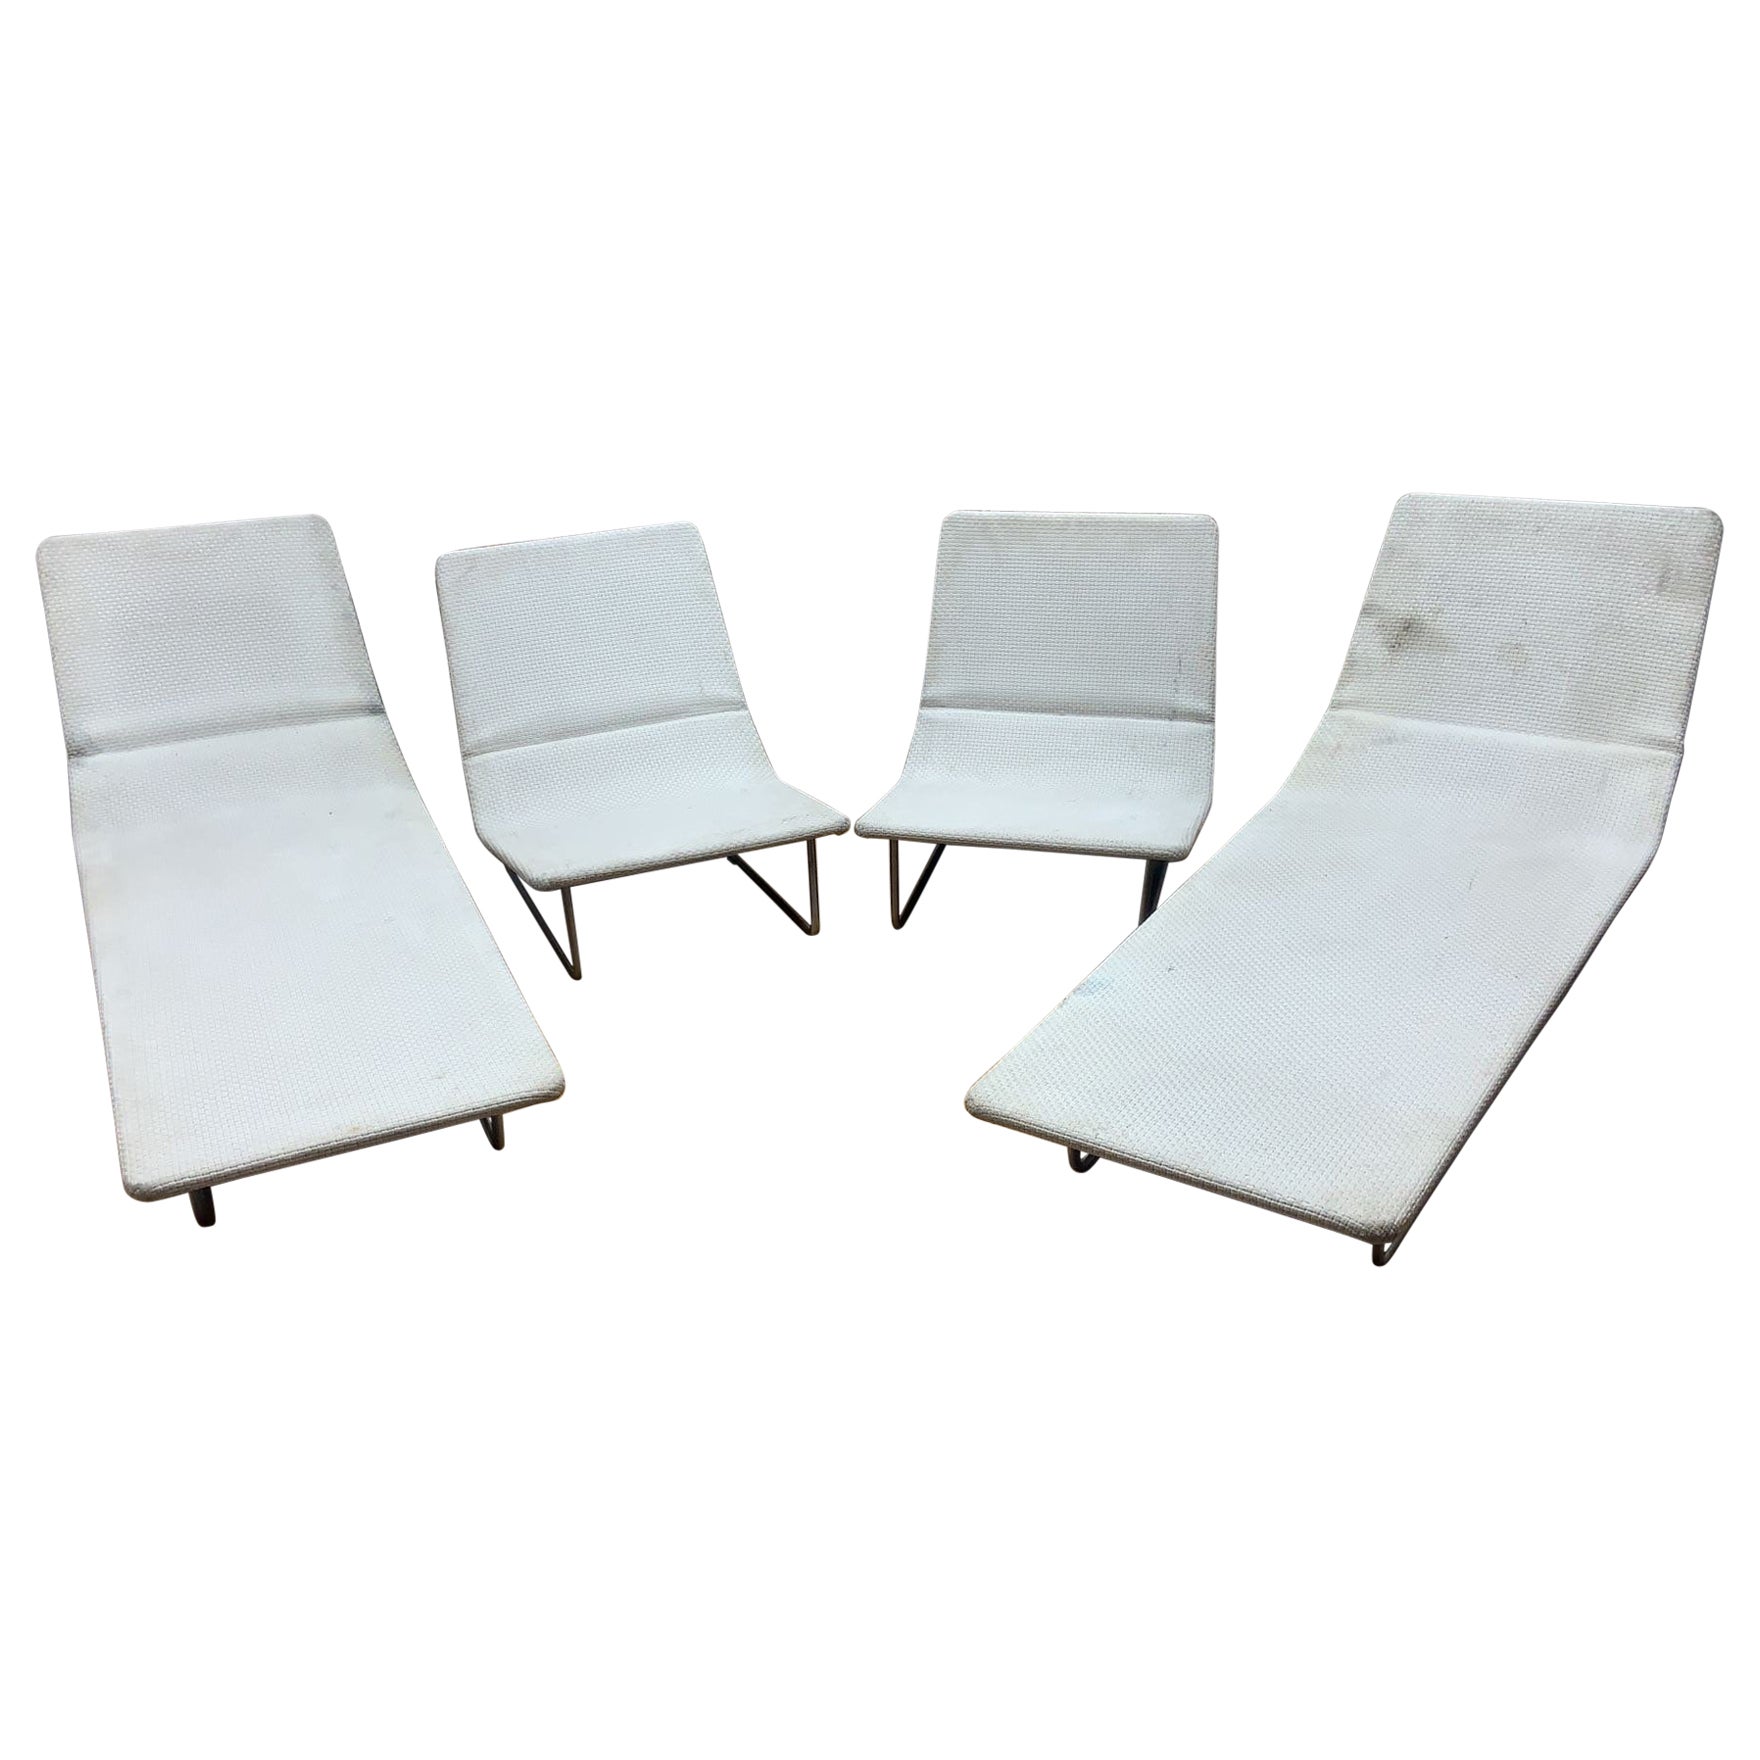  2 Sand and 2 Surf Sun Loungers by Francesco Rota for Paola Lenti, Set of 4 For Sale